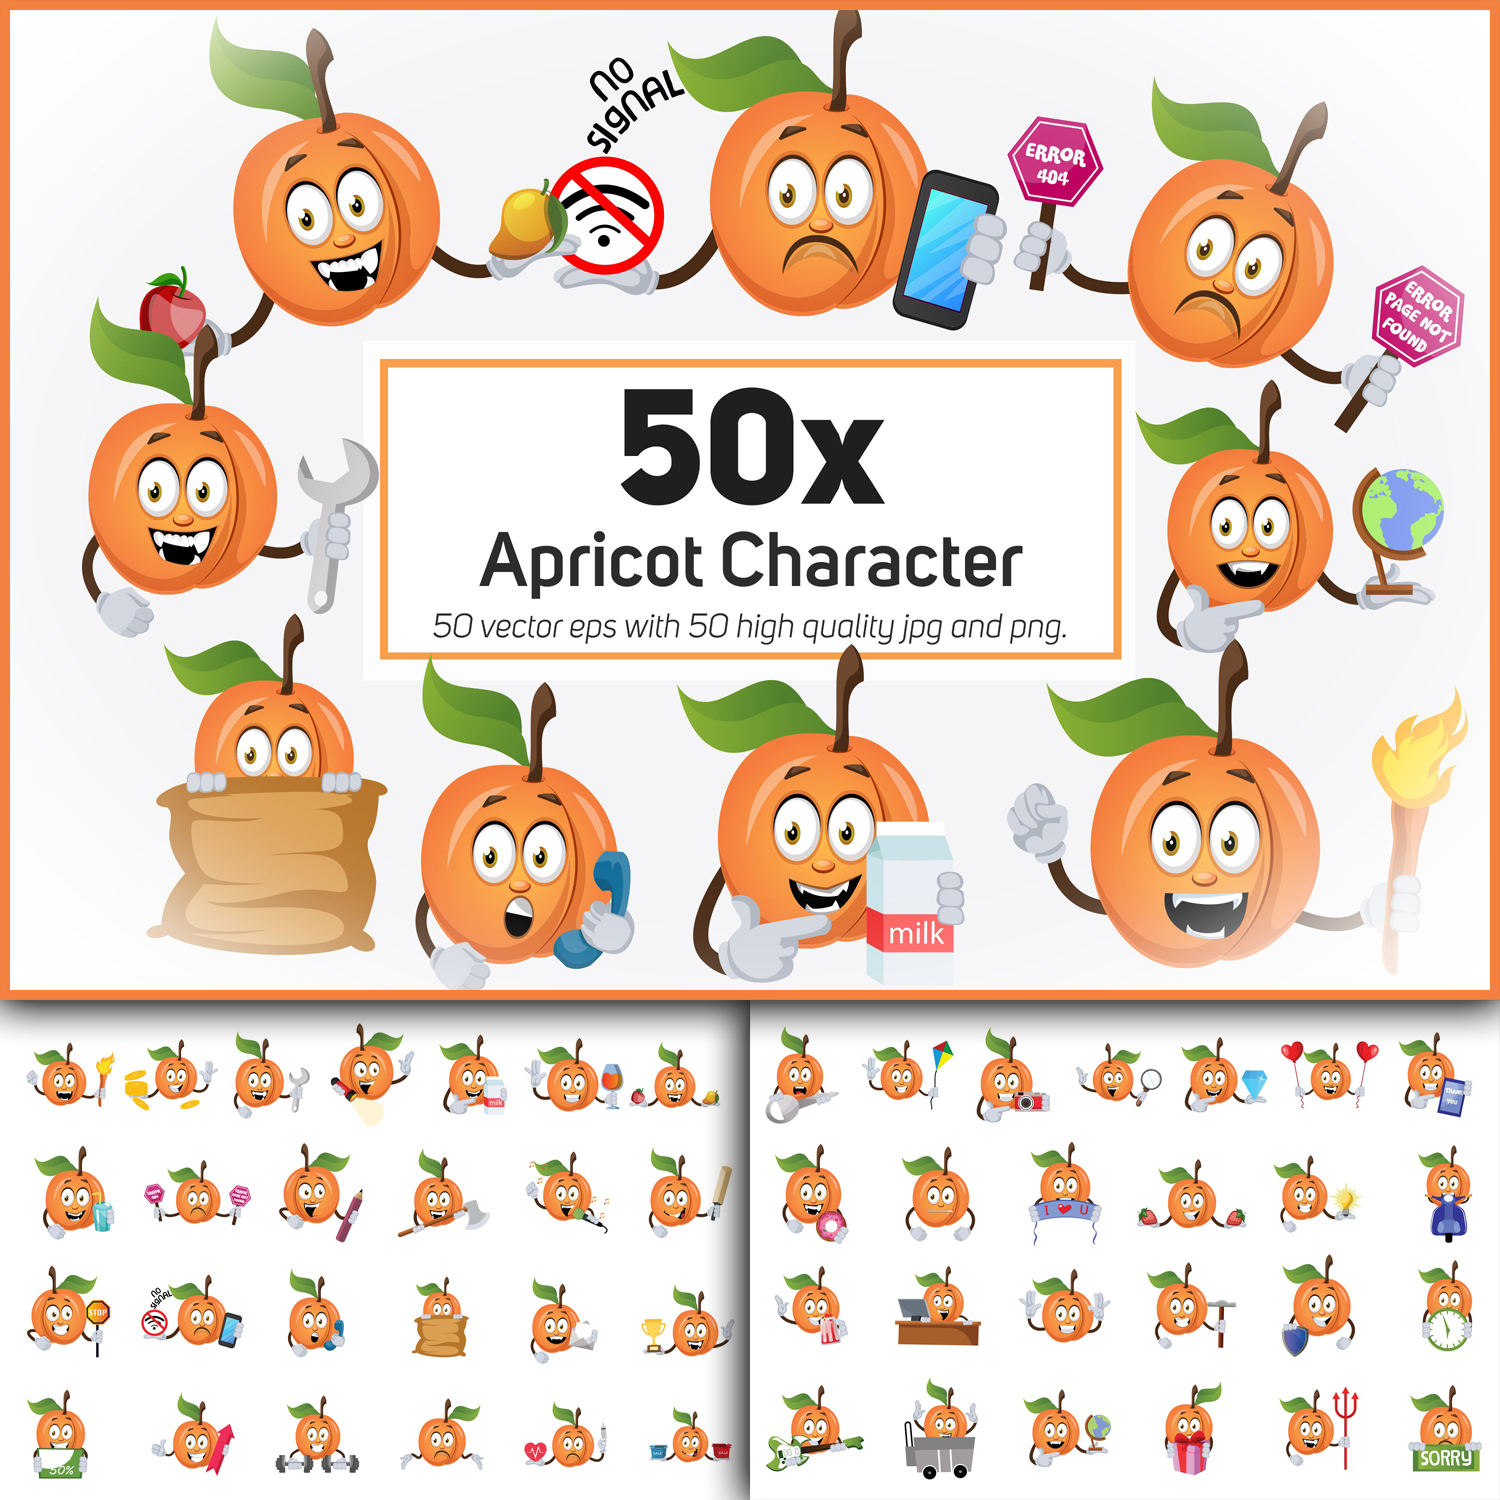 50x Apricot Character and Mascot Collection illustration. cover.